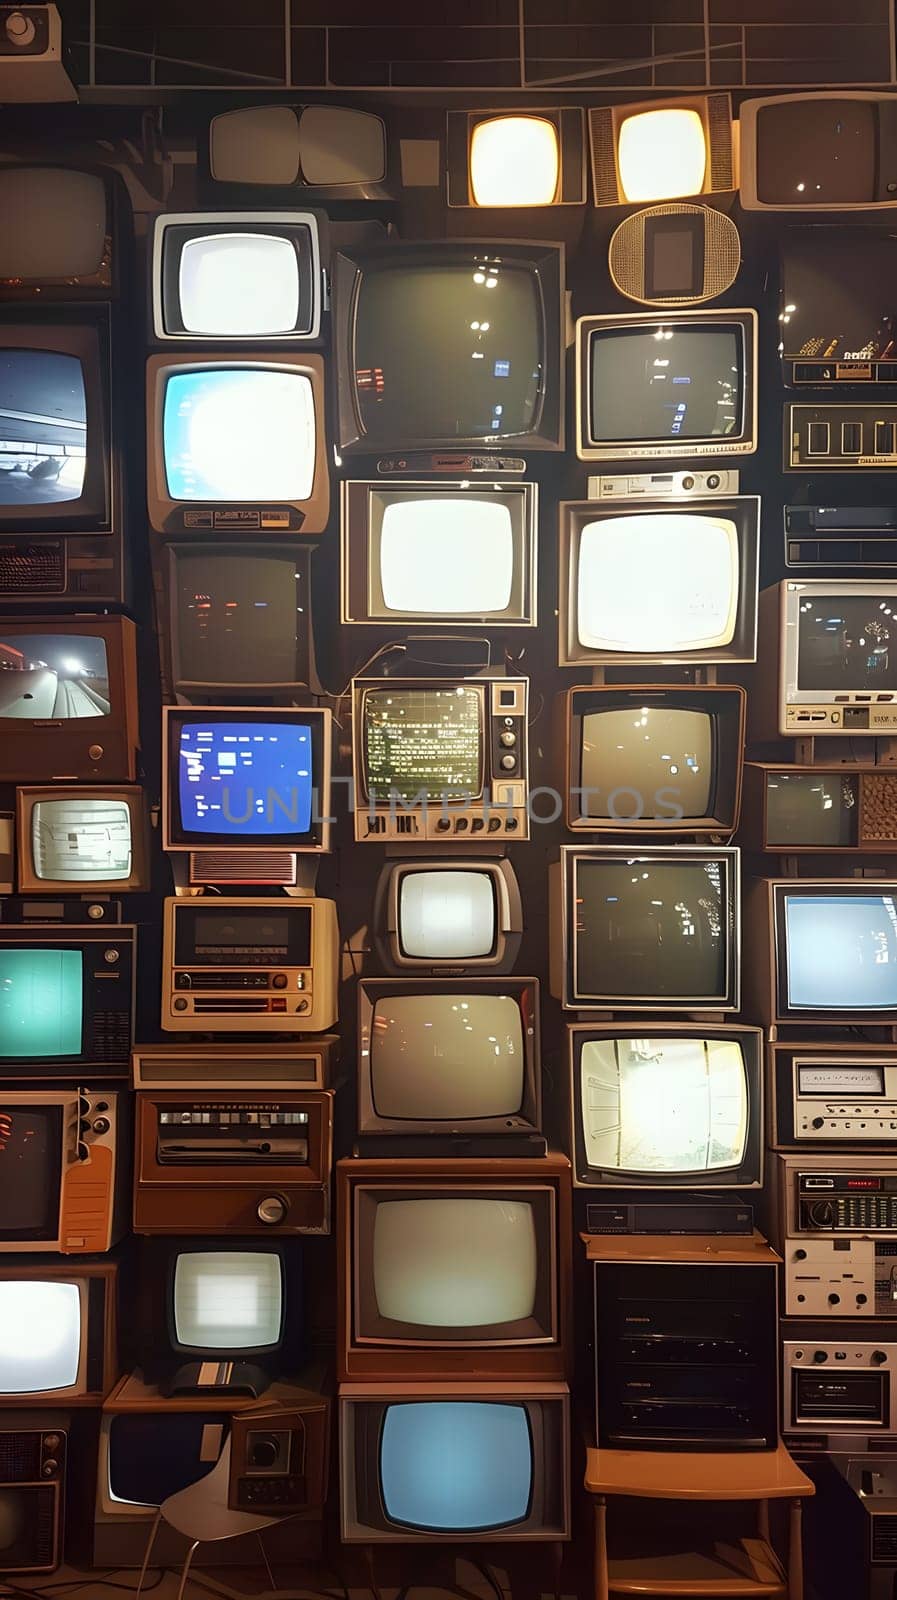 Several vintage televisions are stacked on top of each other in a brown building with a wooden facade. The rectangle shelving is made of hardwood and metal, contrasting with the wood flooring